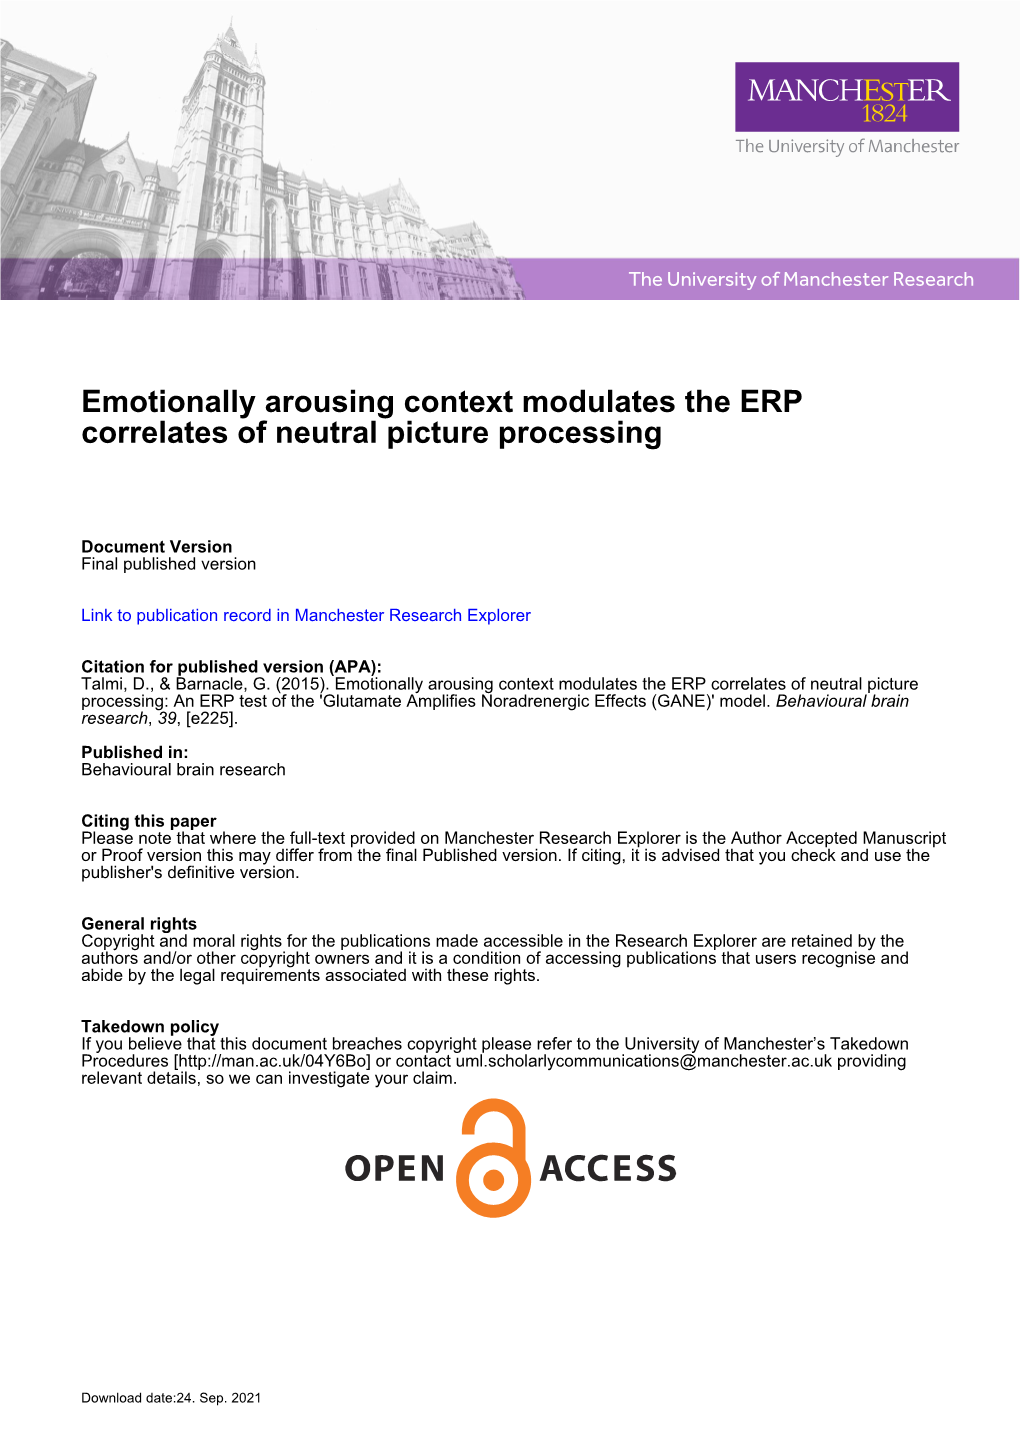 Emotionally Arousing Context Modulates the ERP Correlates of Neutral Picture Processing